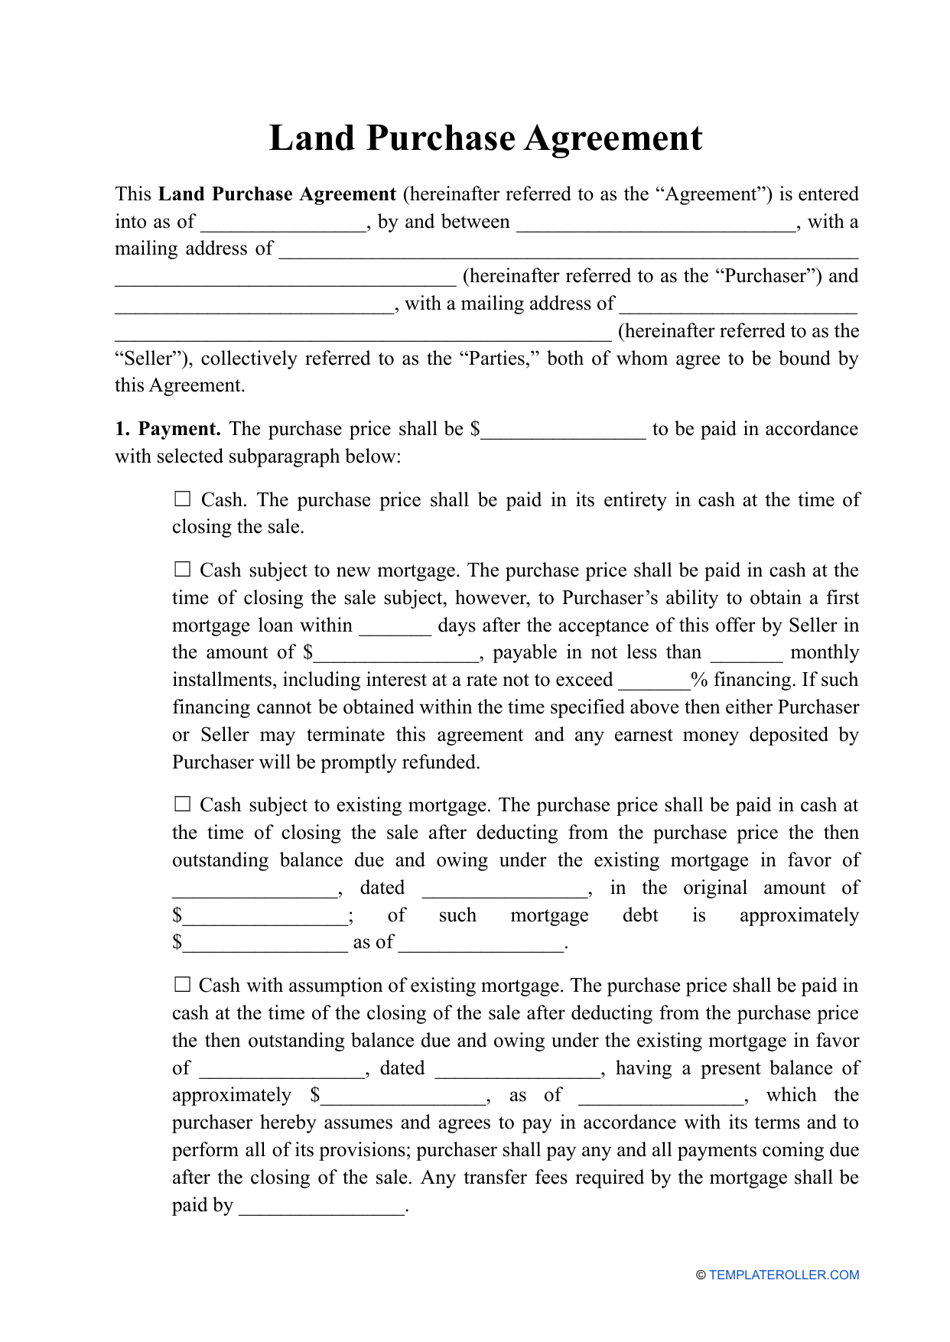 Land Purchase Agreement Template, Page 1